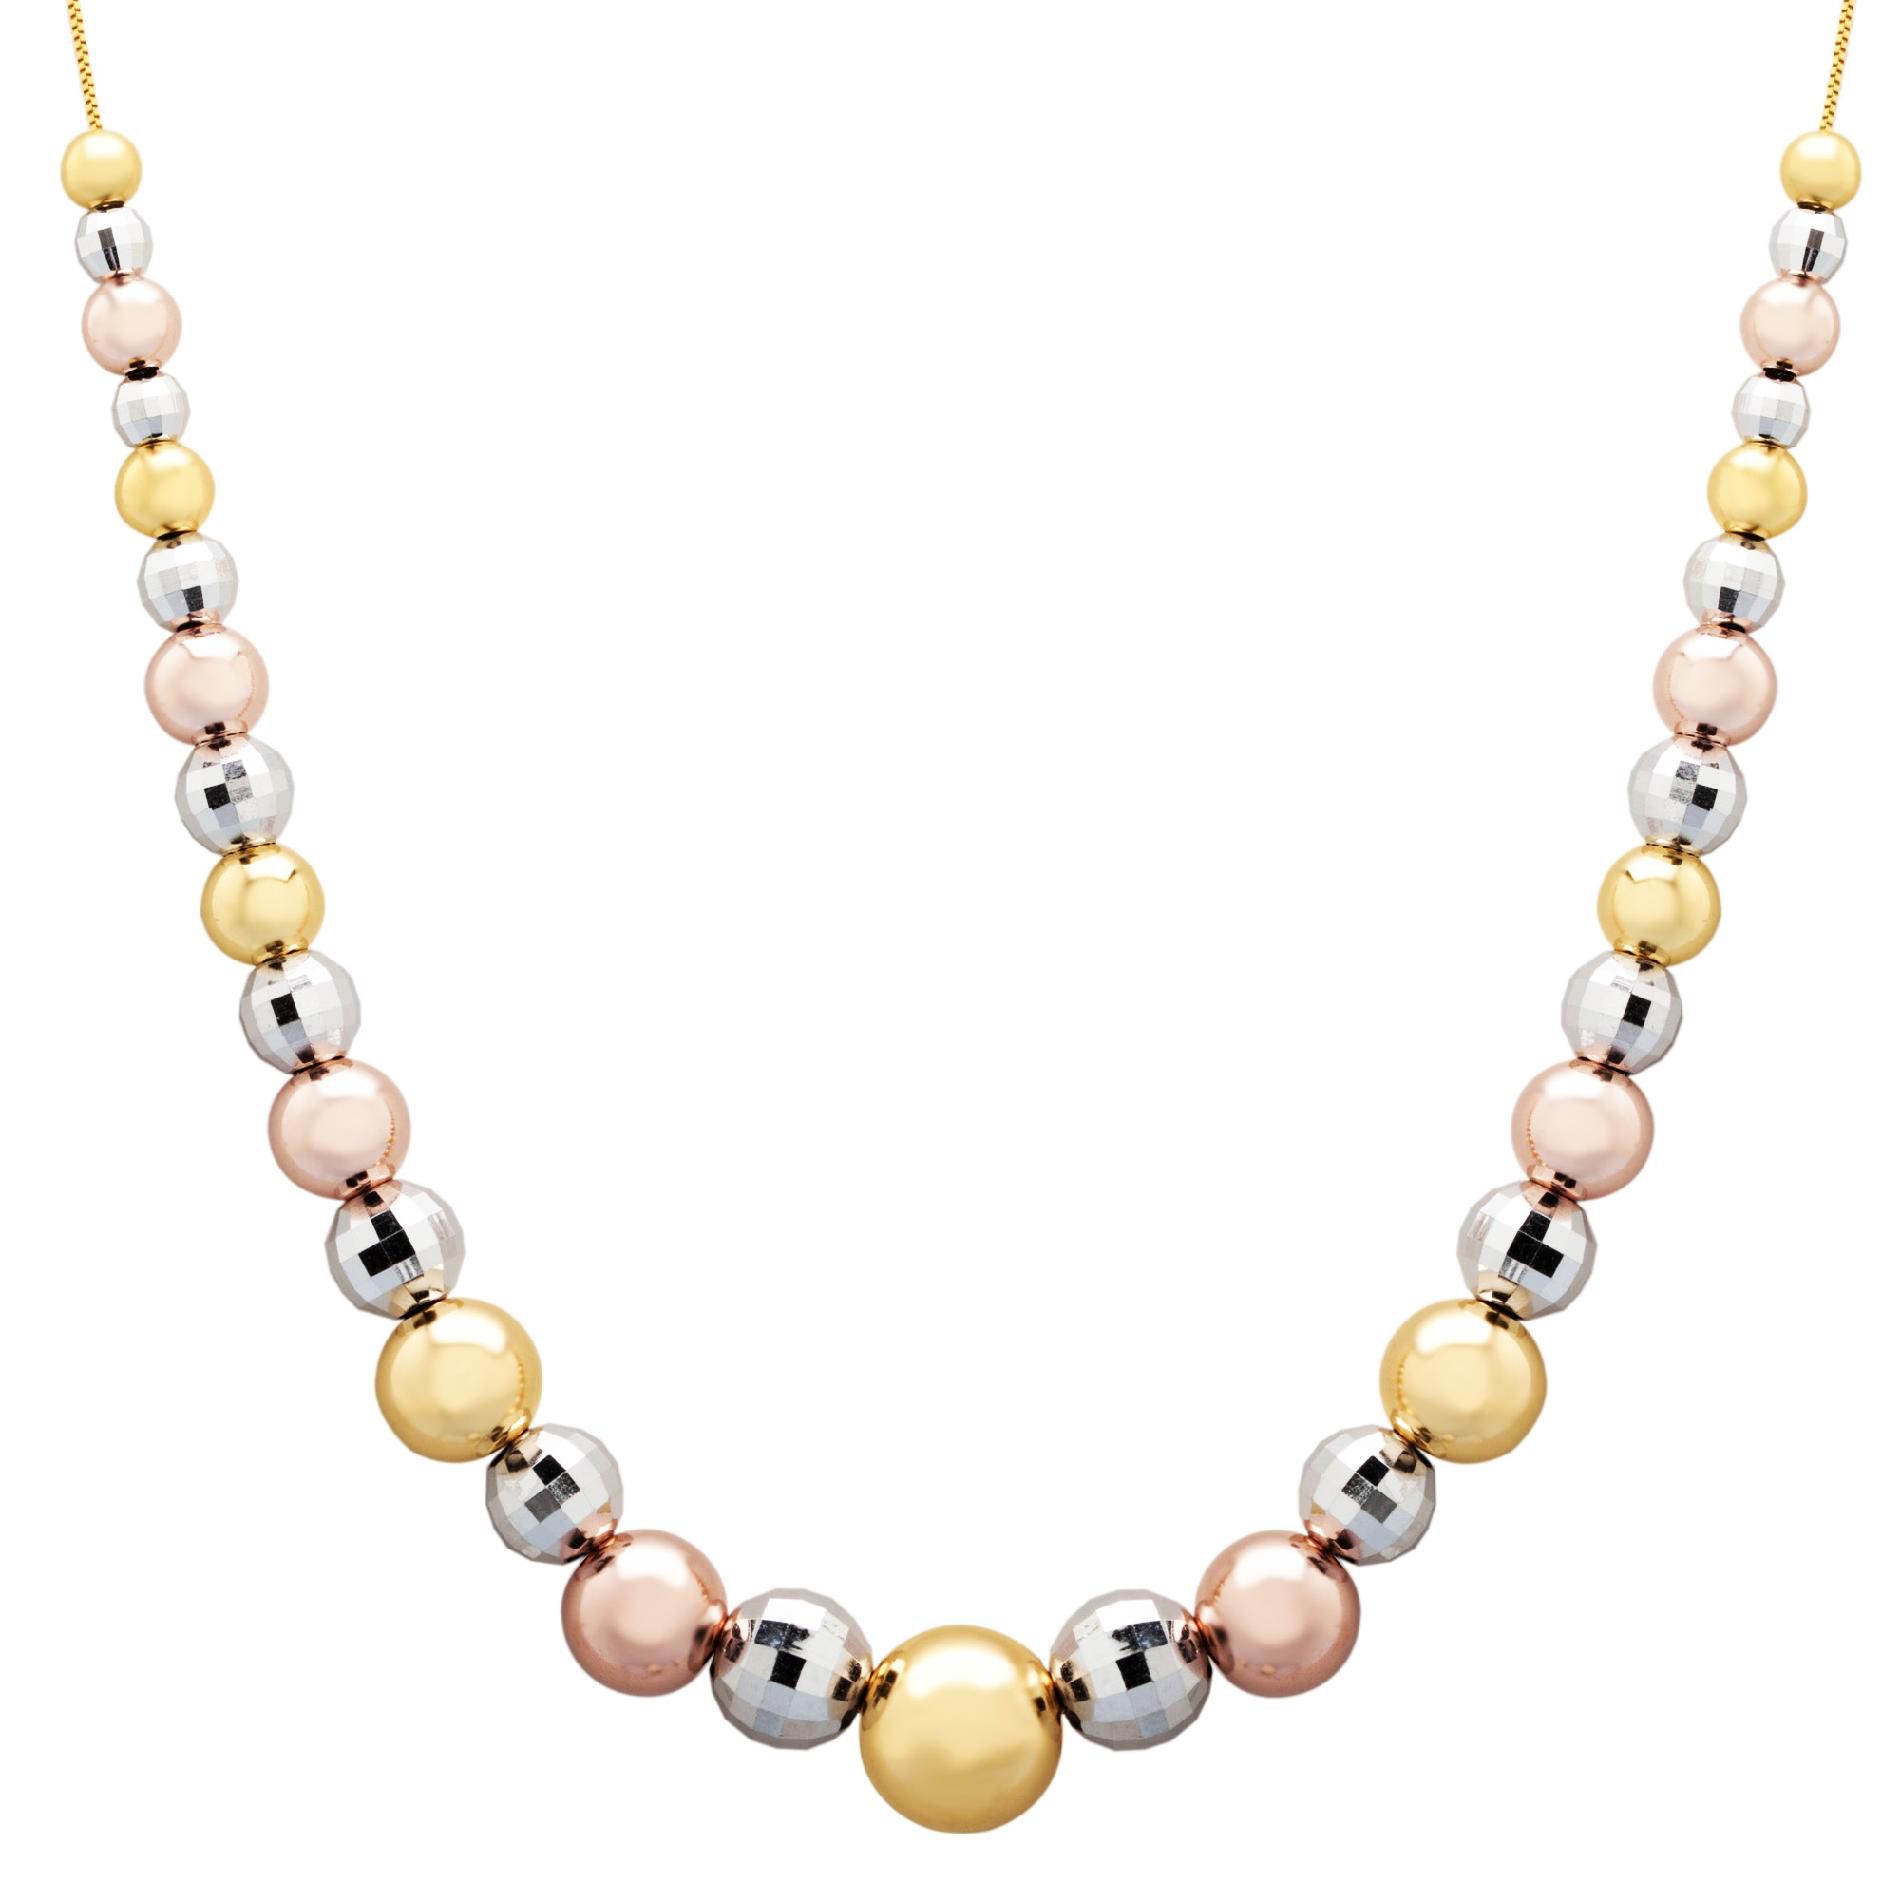 Gold and Silver Tricolor Faceted Bead Necklace